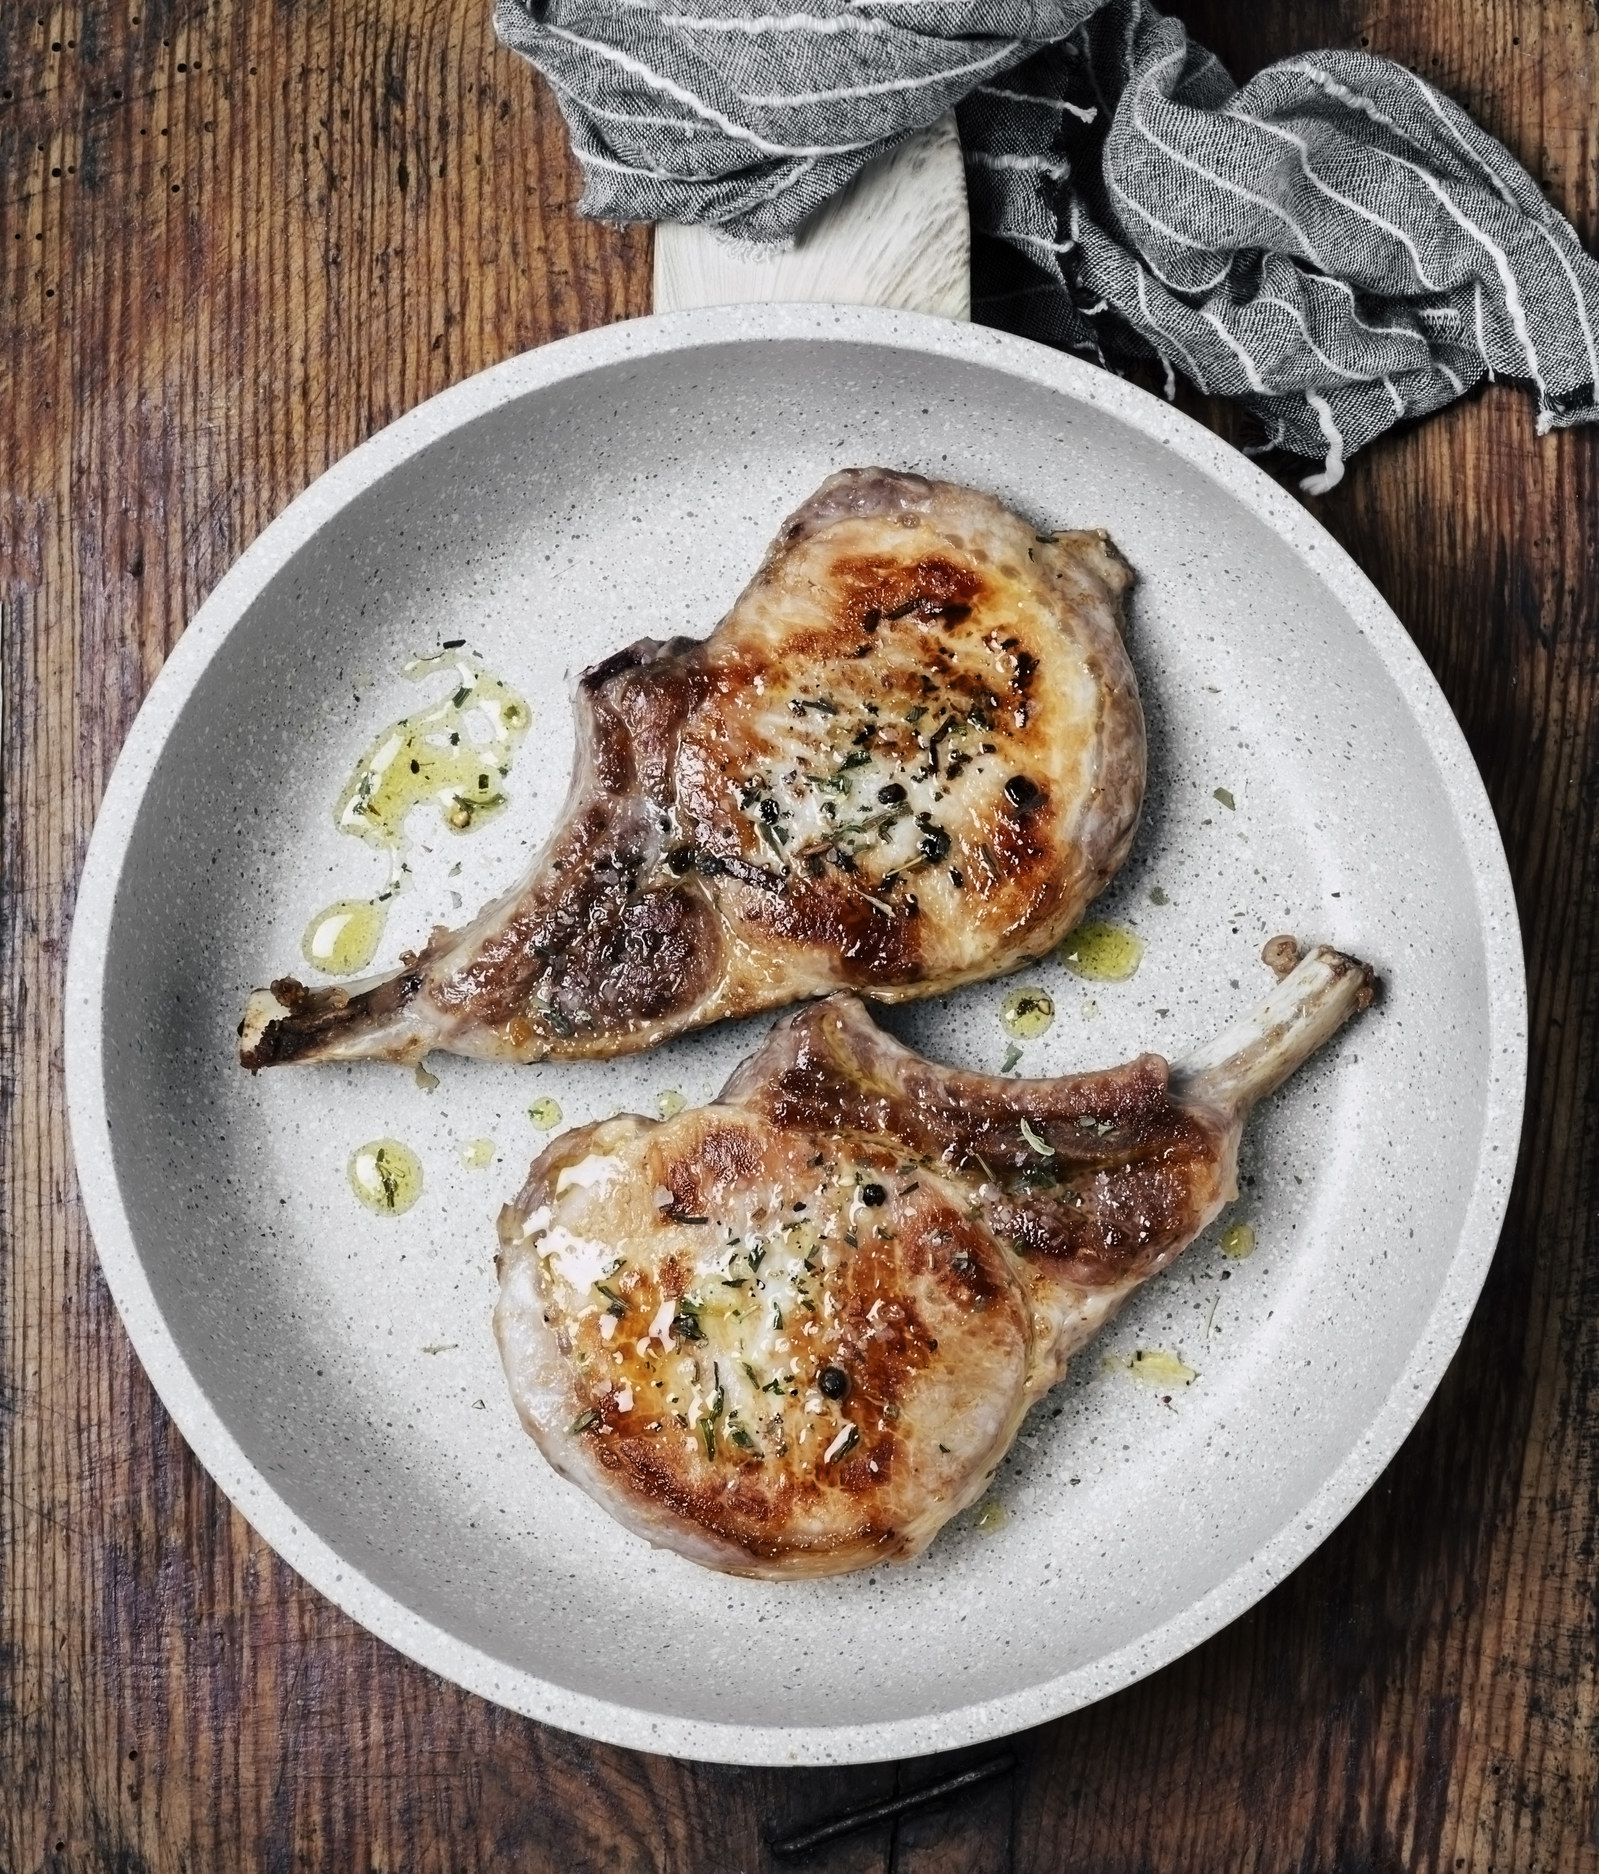 Pork chops in a frying pan on wooden background.